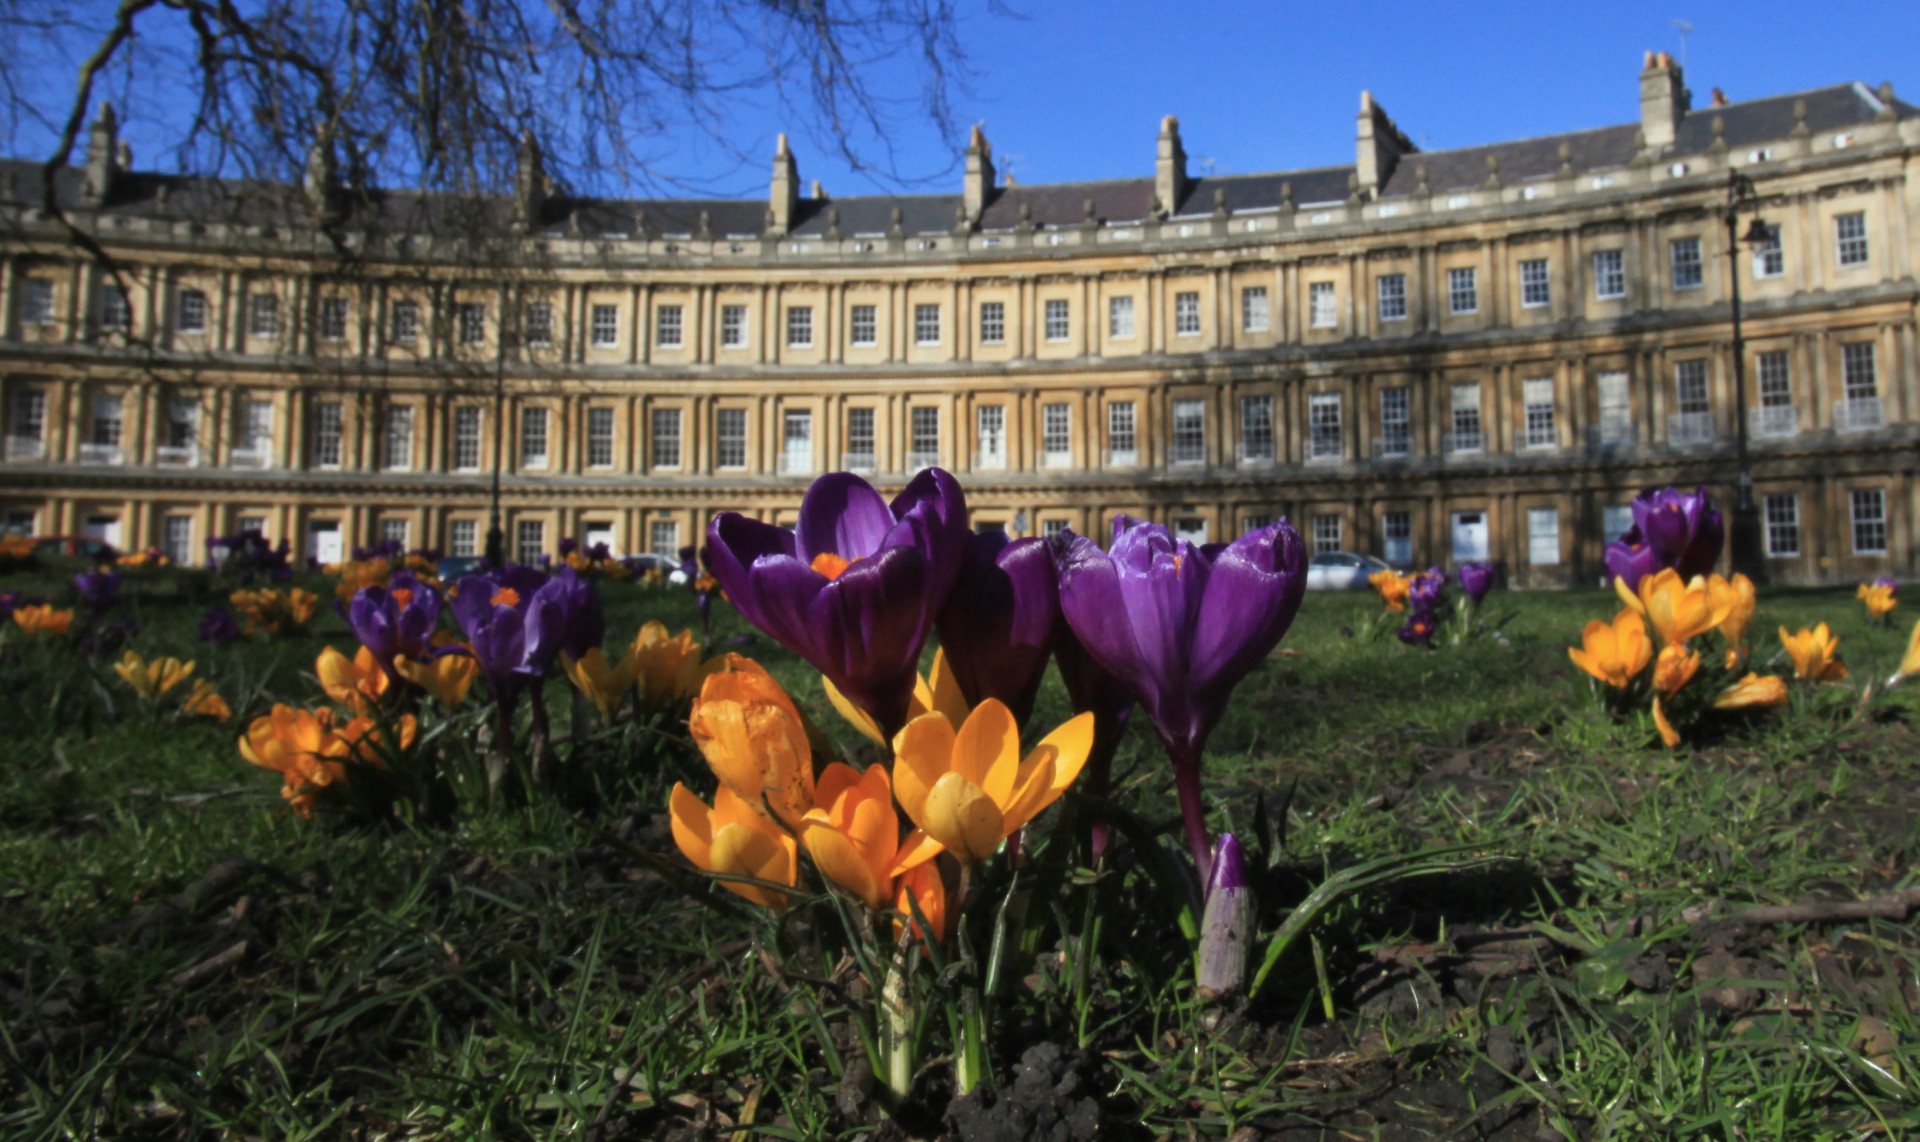 Fans of crocus flowers can see them in bloom outside the Circus in Bath.<p>You may also like:<a href="https://www.starsinsider.com/n/494084?utm_source=msn.com&utm_medium=display&utm_campaign=referral_description&utm_content=344596v2en-en"> The most absurd female deaths in literature</a></p>